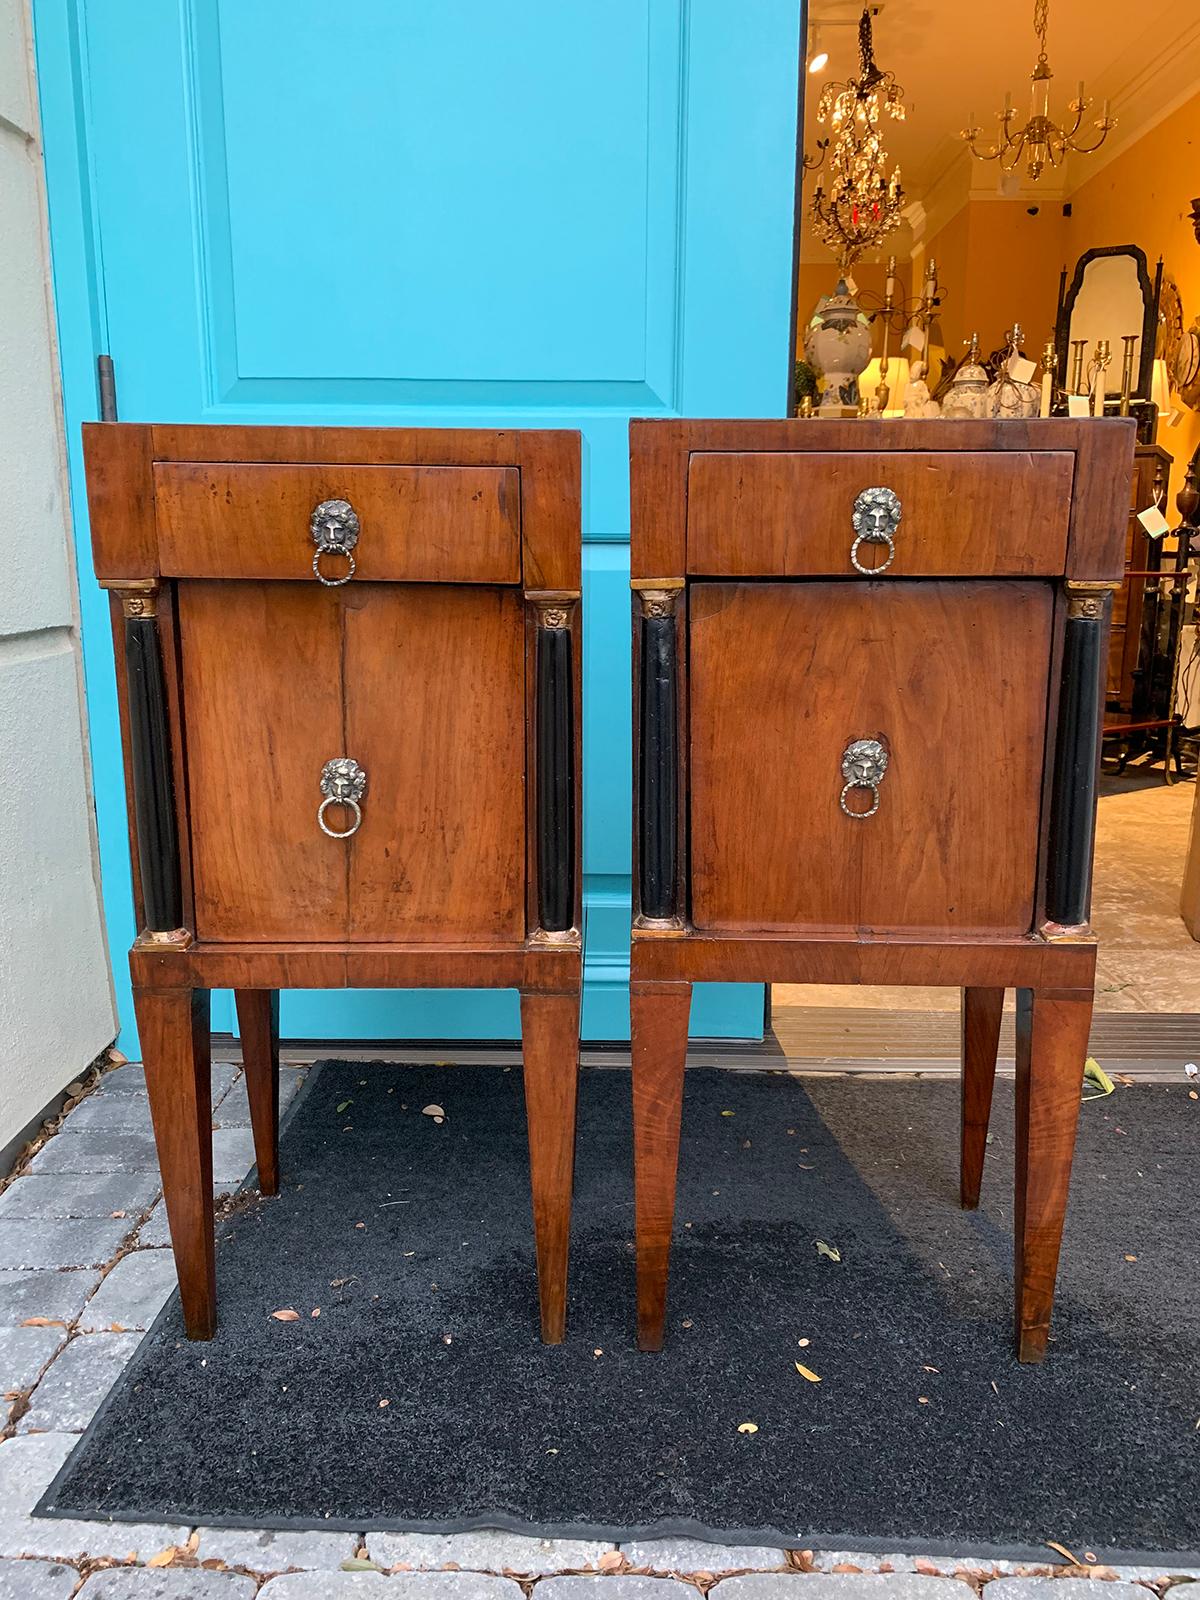 Pair of 18th-19th century Italian directoire bedside commodinis.